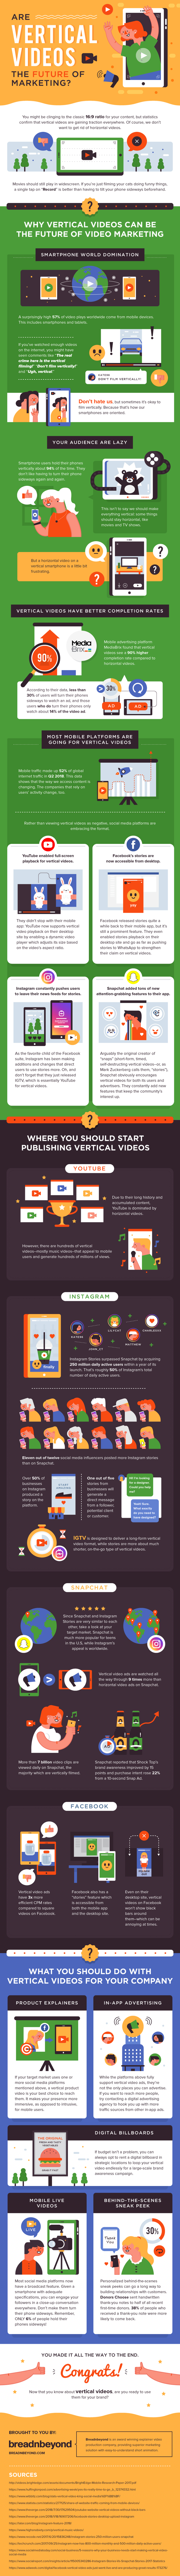 The Ultimate Guide to Vertical Videos for Marketing [INFOGRAPHIC]